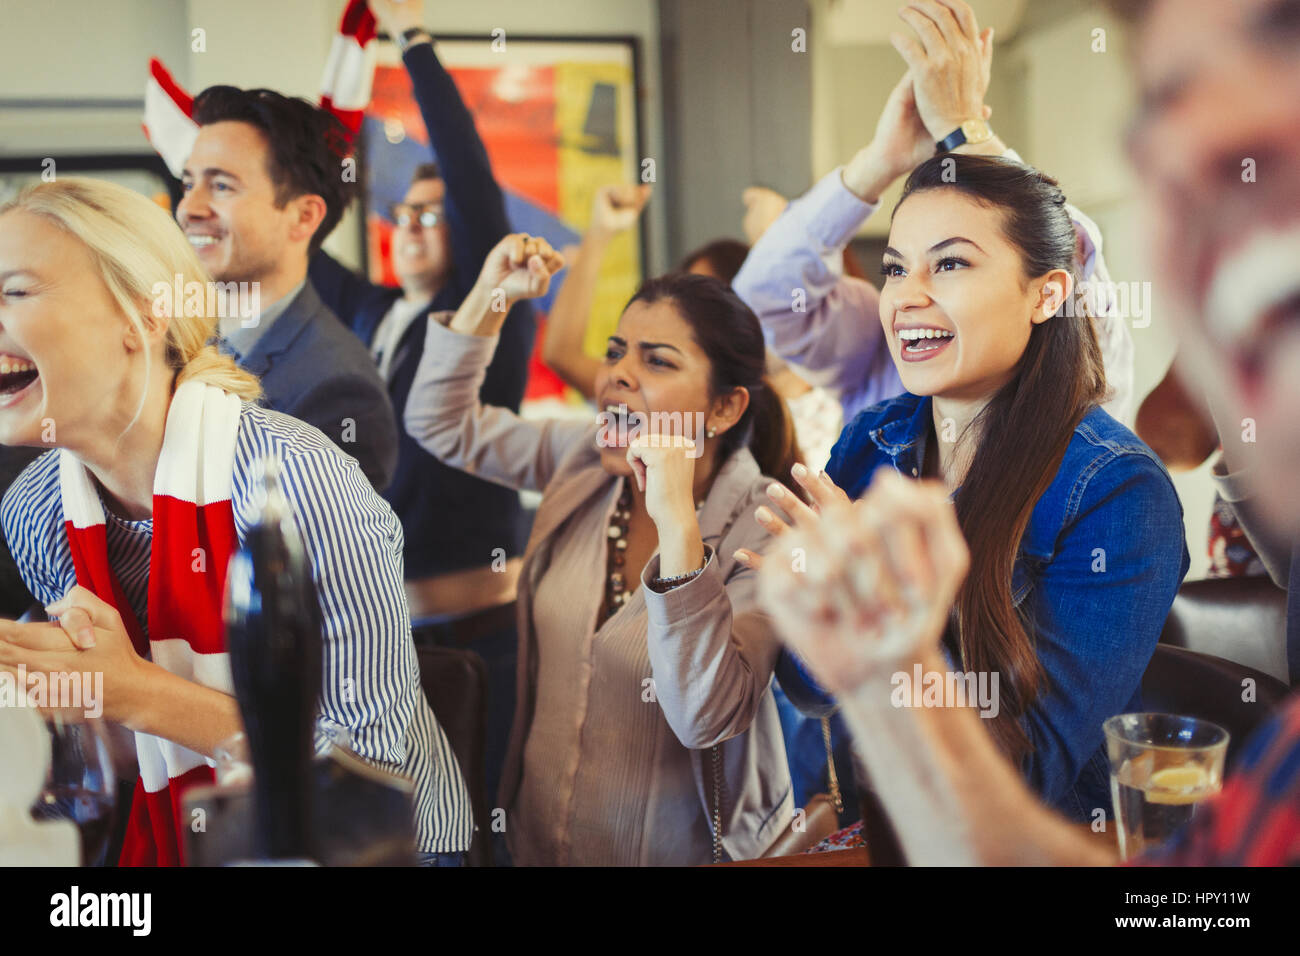 Enthusiastic sports fans cheering watching game at bar Stock Photo